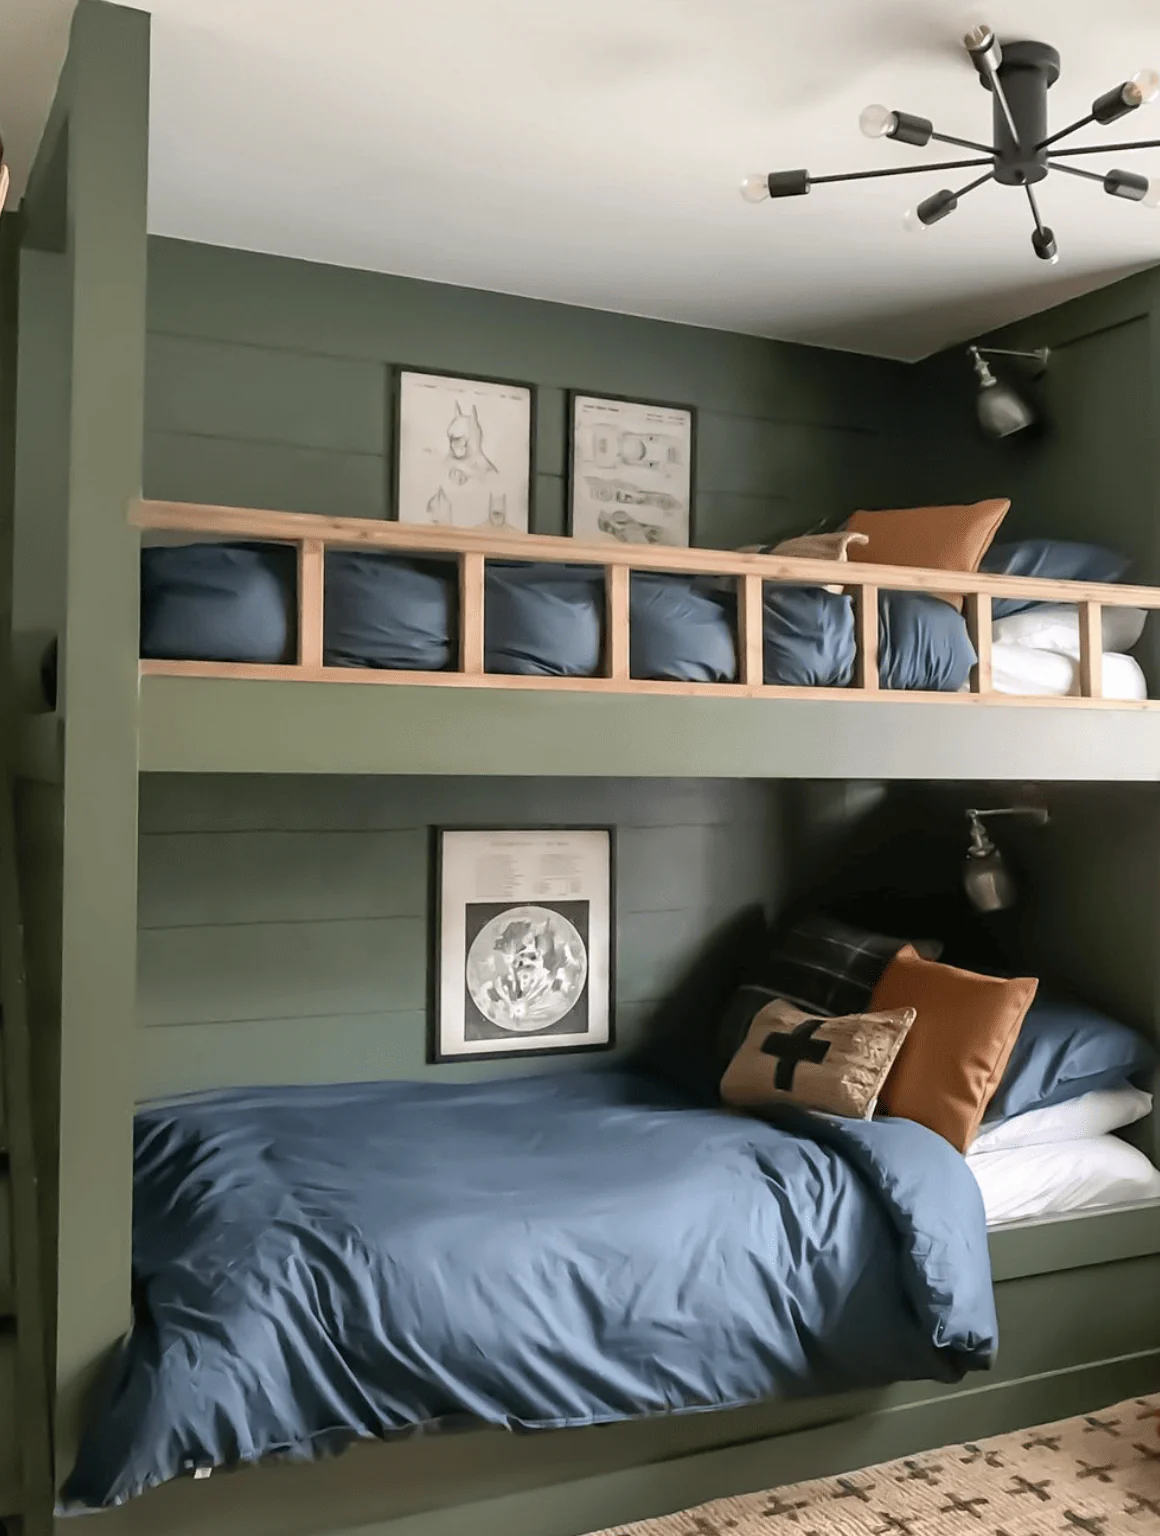 Built-in bunk beds a fun, functional upgrade to any home